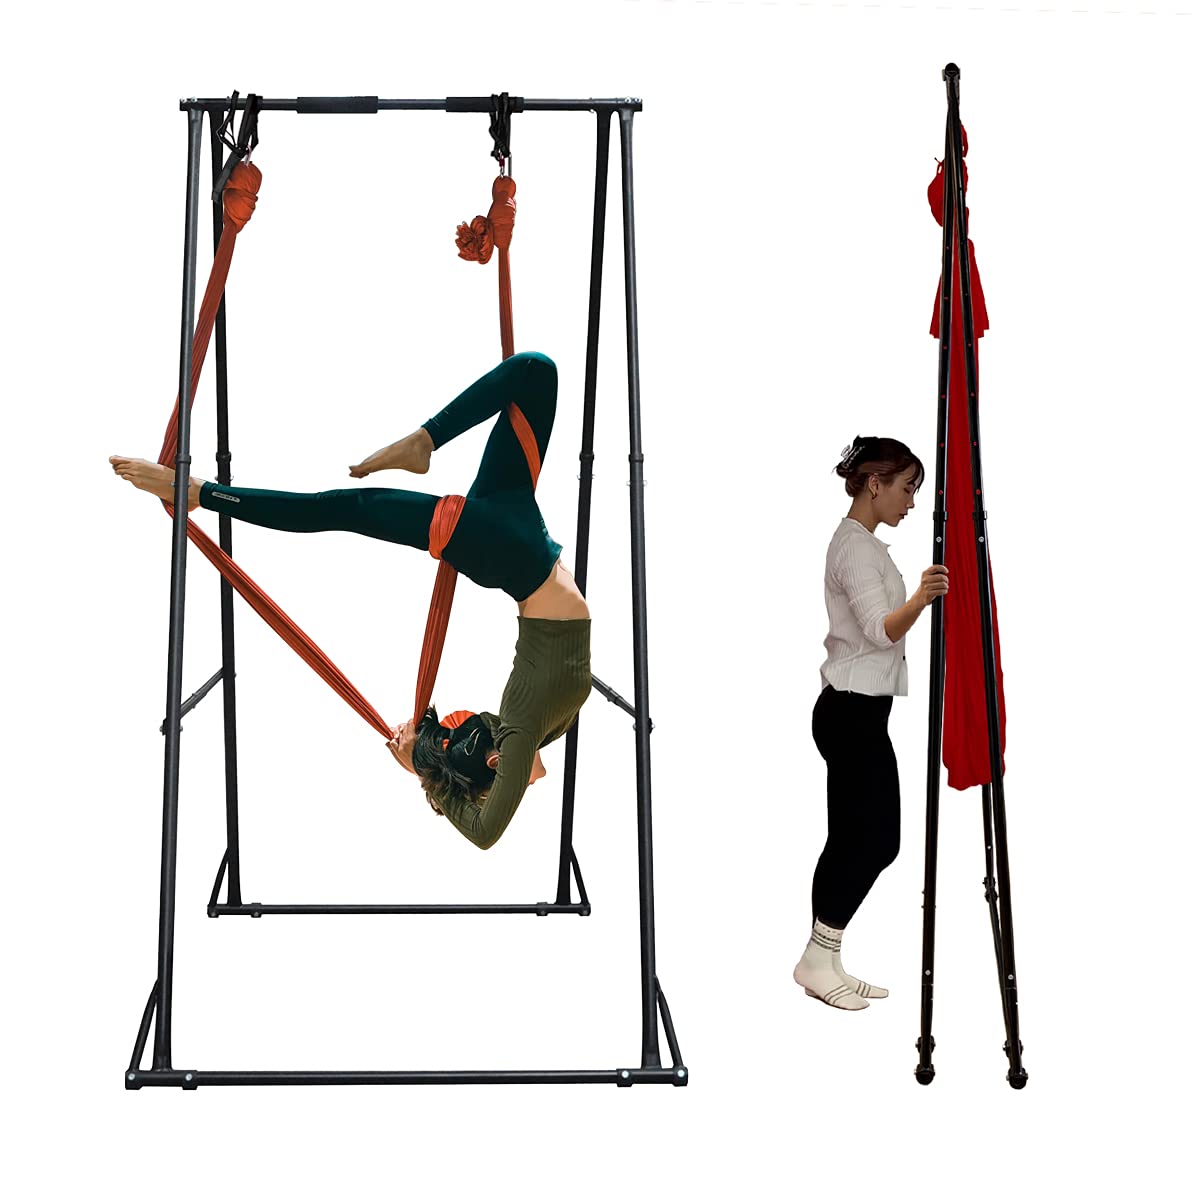 KT Aerial Yoga Stand Frame Indoor Outdoor KT1.1518. Foldable, Portable Aerial Silk rig. Height Adjustable, Stable and Durable Yoga Swing Stand Frame